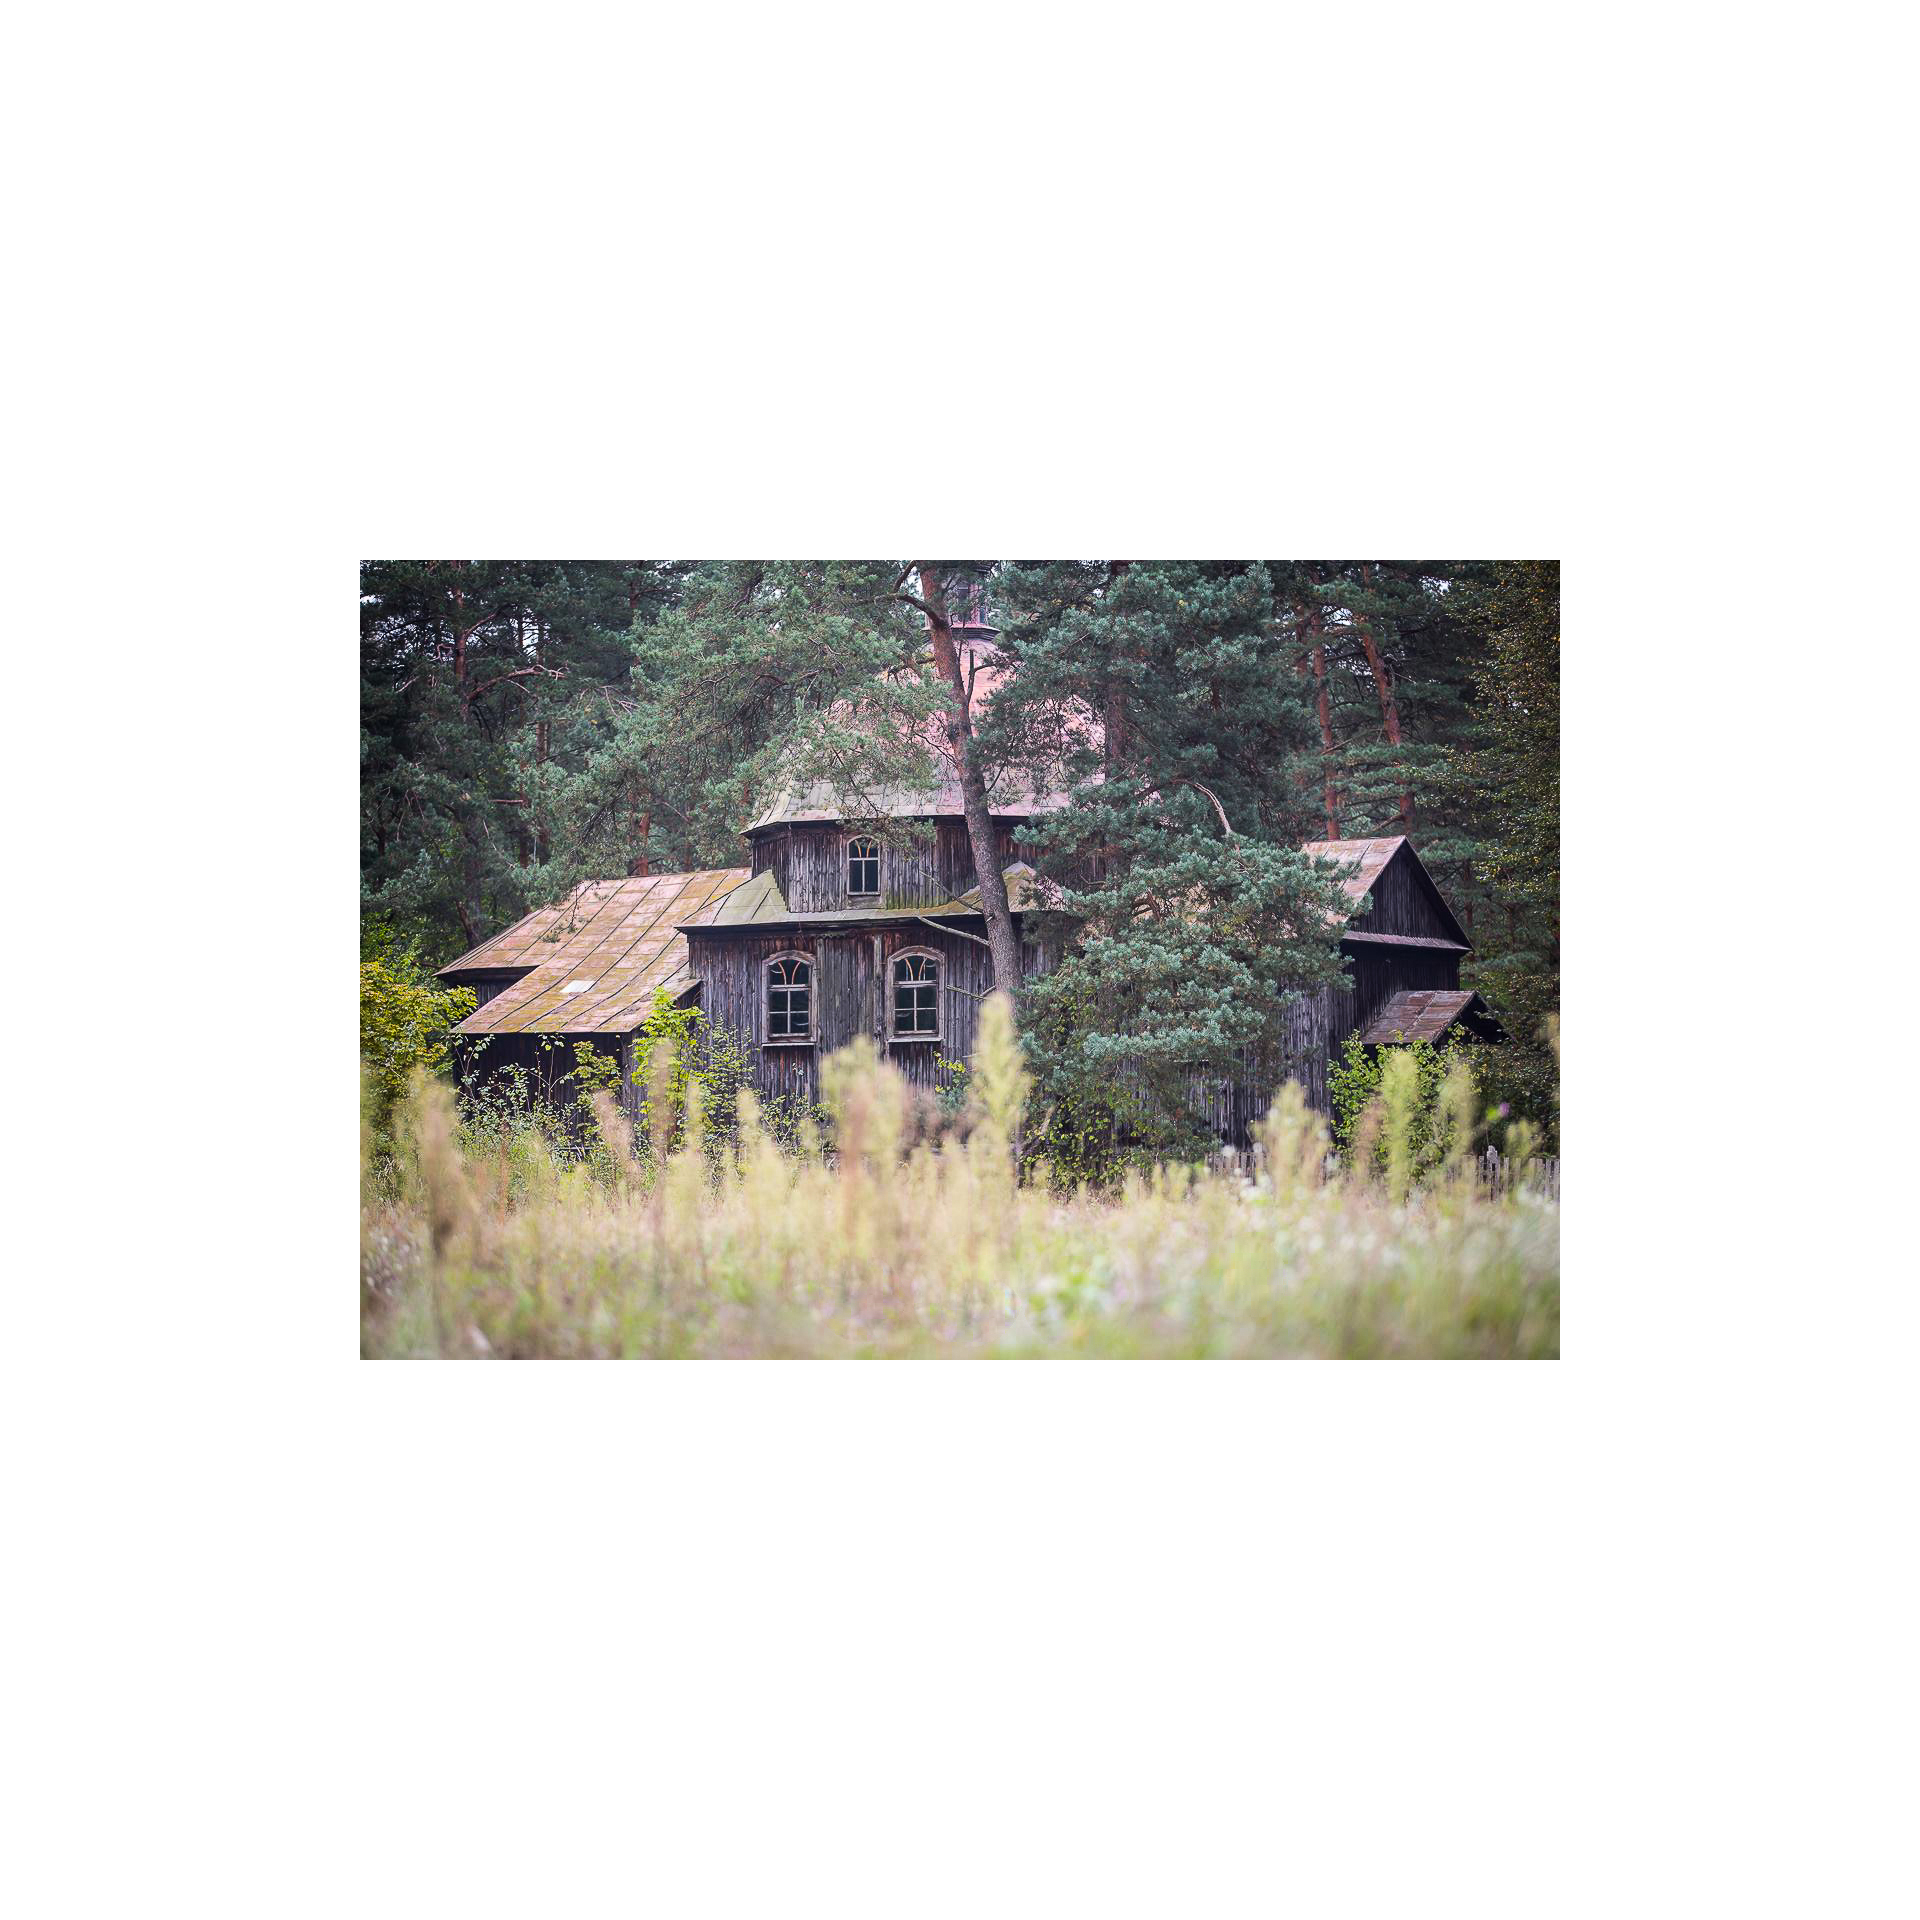 An old, dilapidated, wooden church among tall grasses and trees